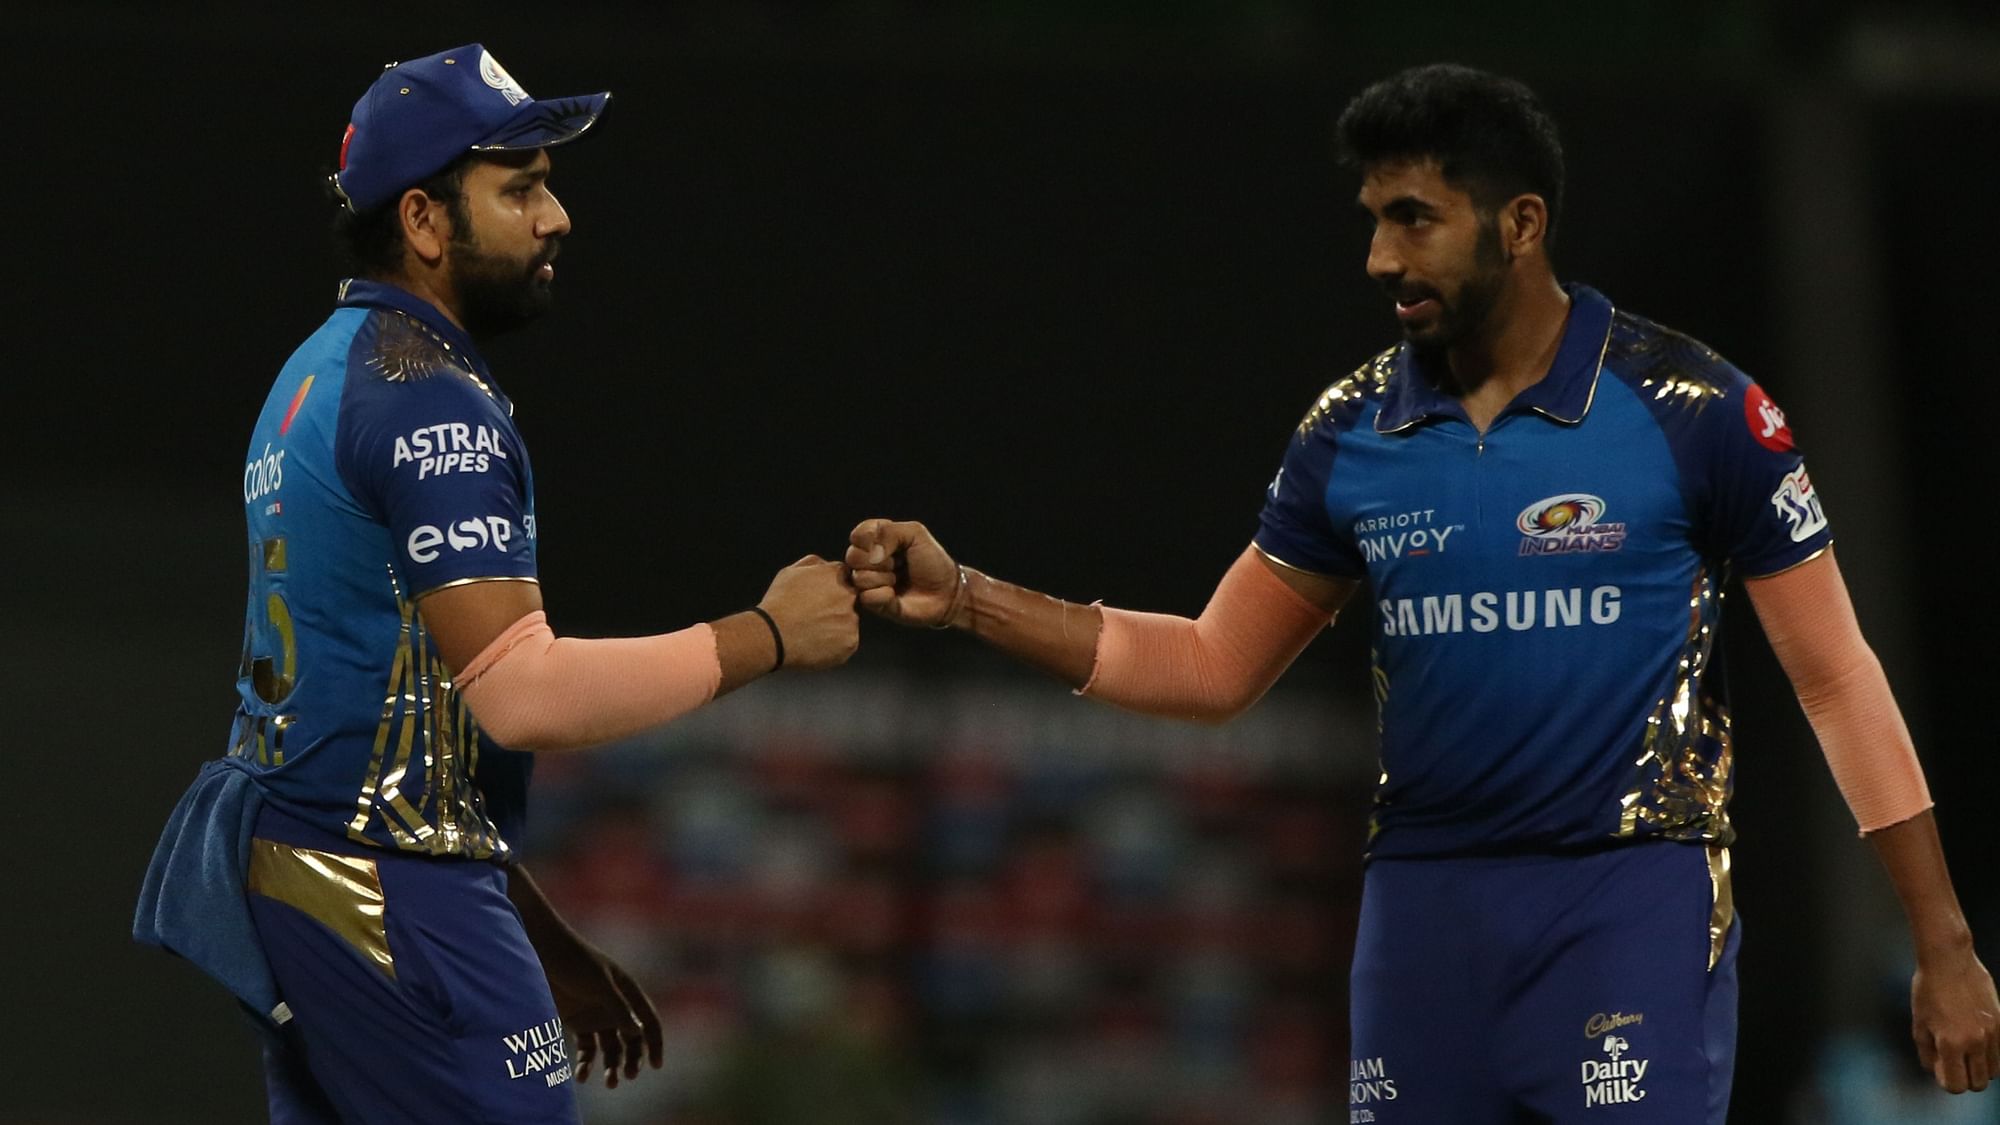 Mumbai Indians have taken up the top spot in the IPL standings, after beating KXIP in Abu Dhabi on Thursday.